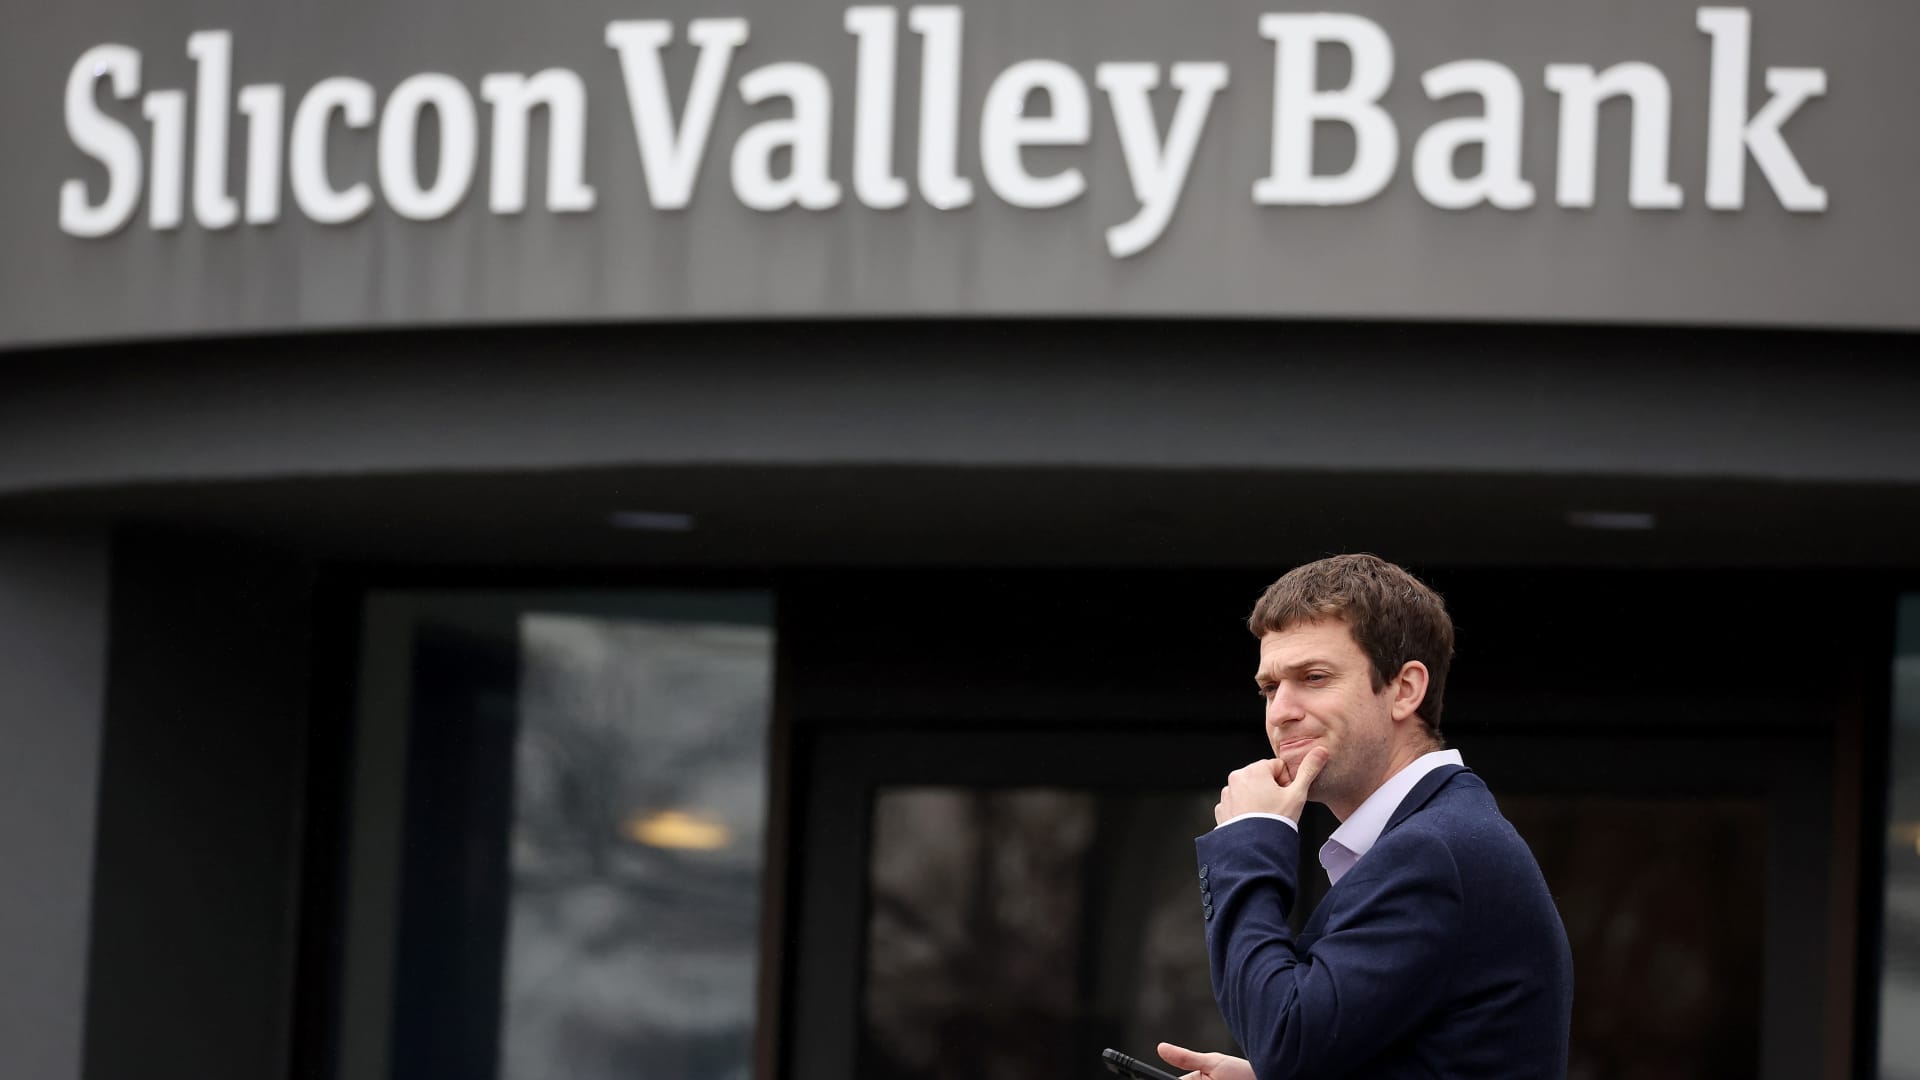 Here’s what could happen next for Silicon Valley Bank customers